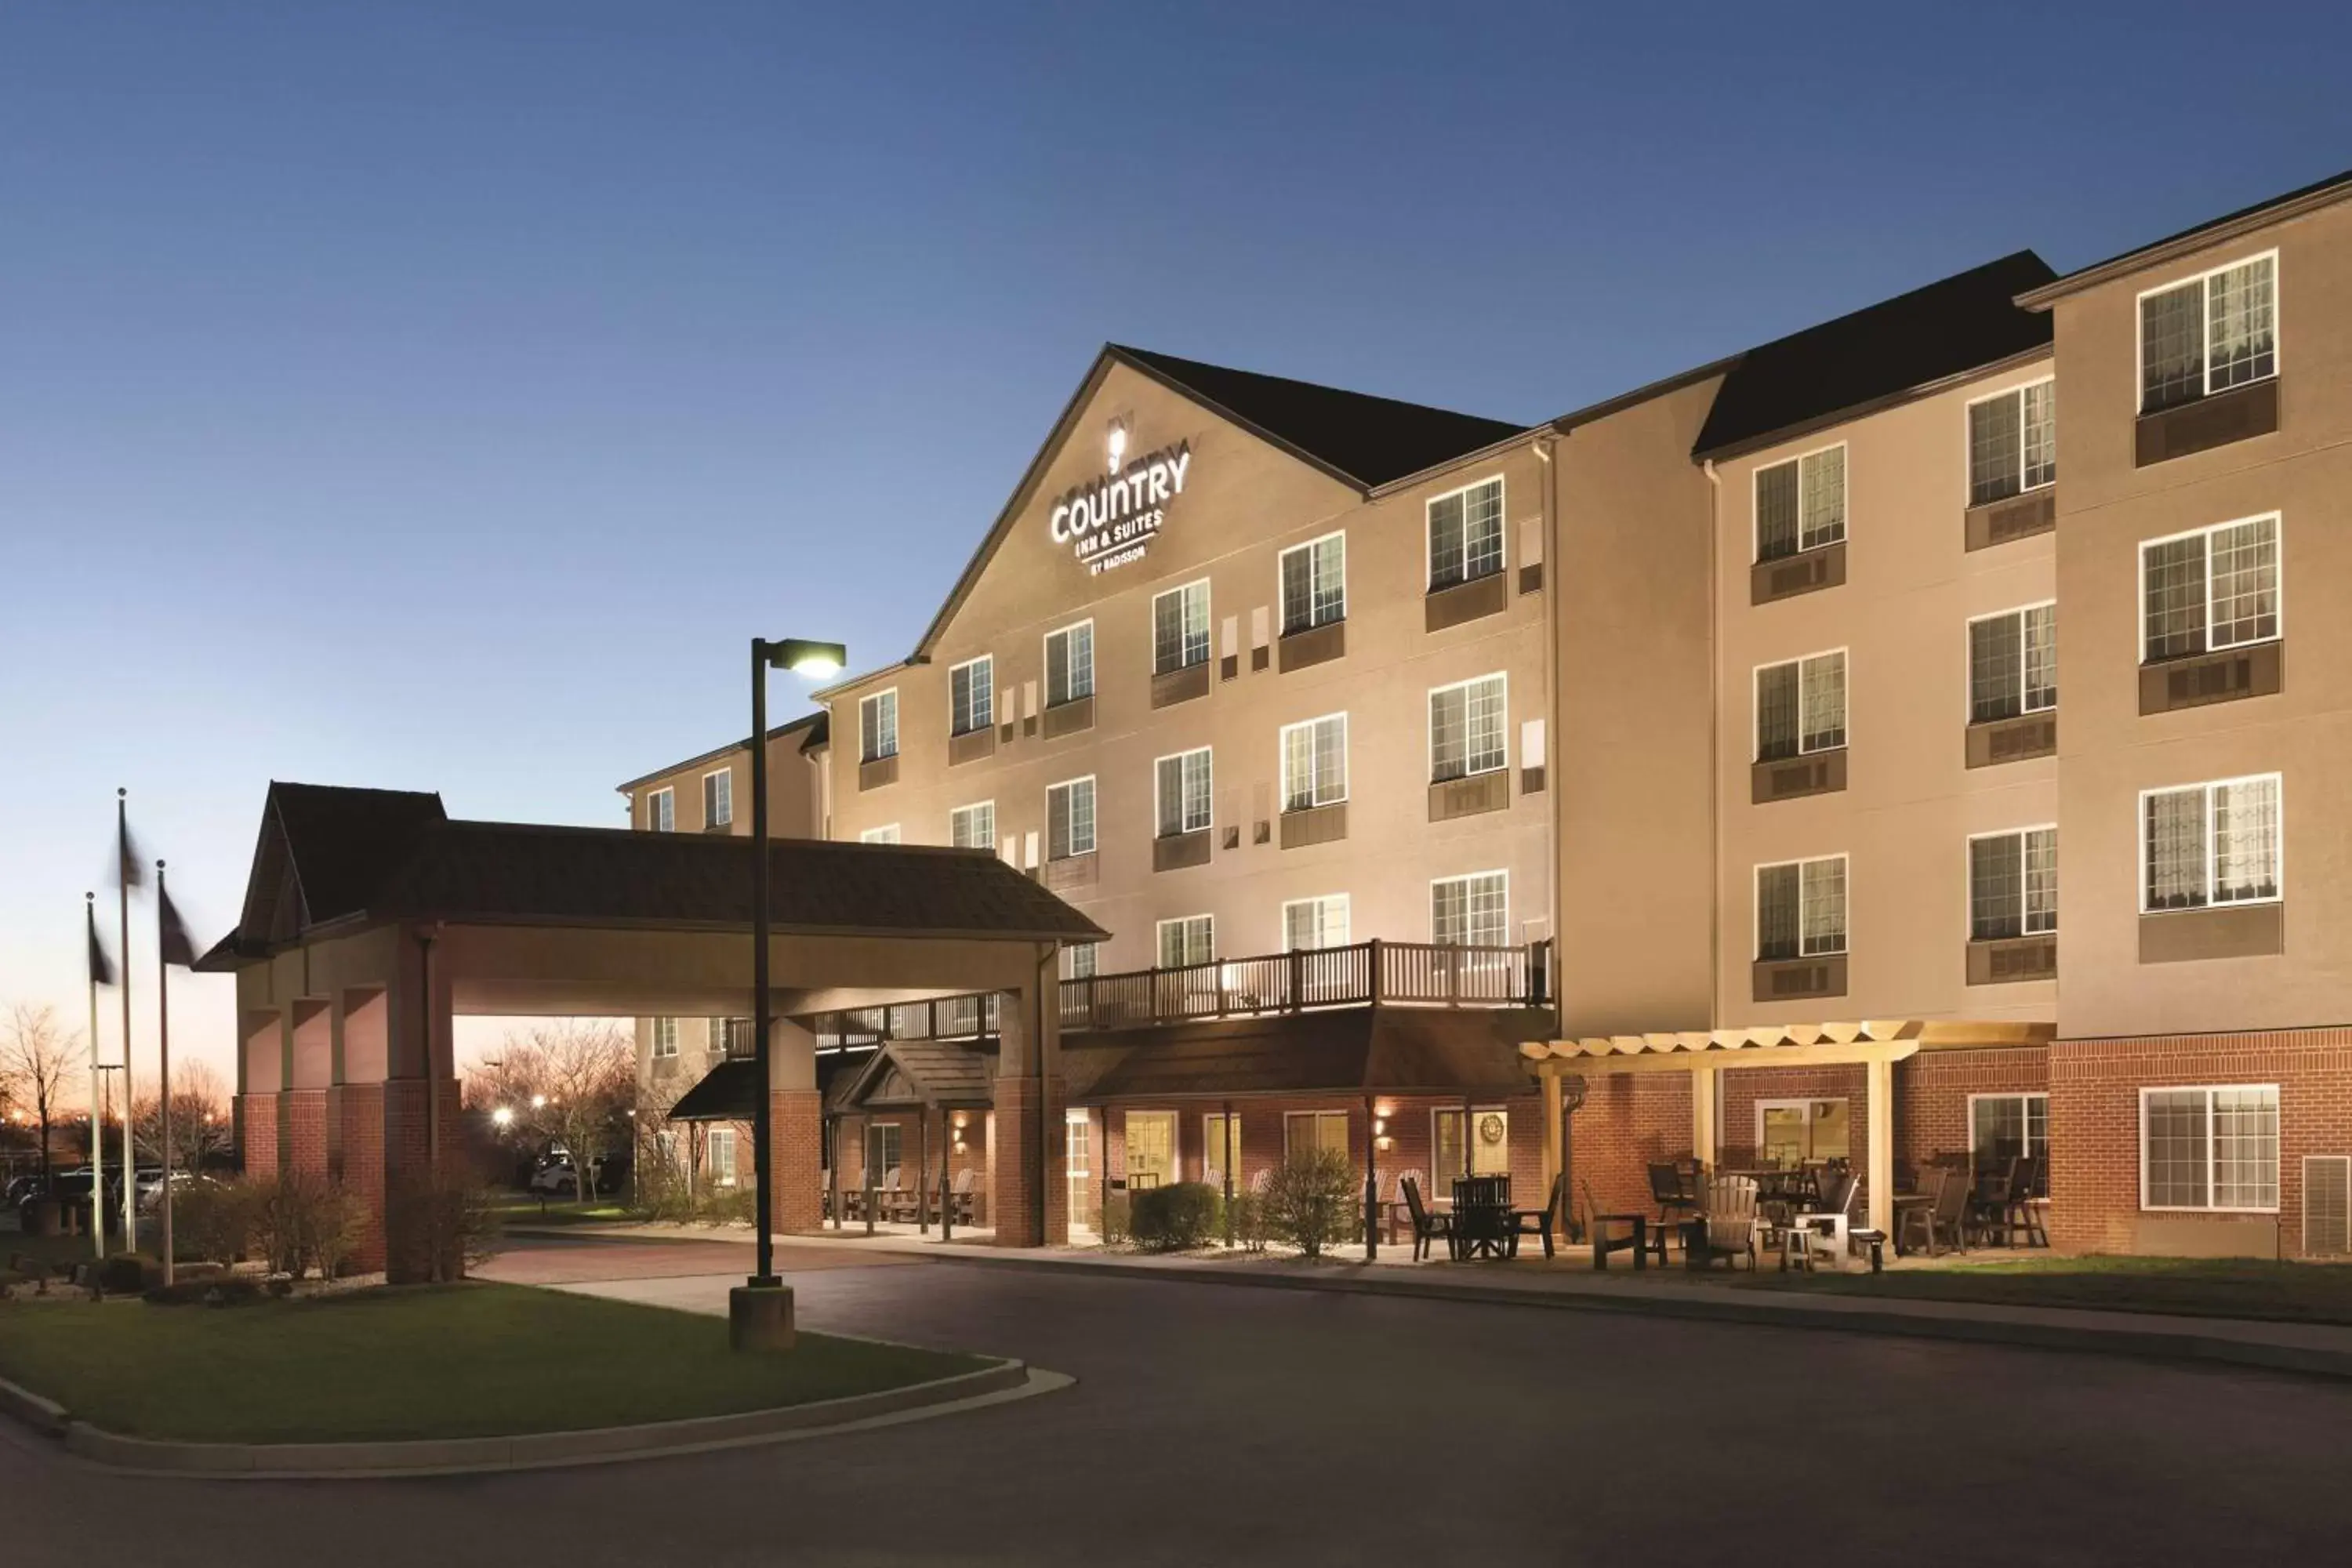 Property Building in Country Inn & Suites by Radisson, Indianapolis Airport South, IN